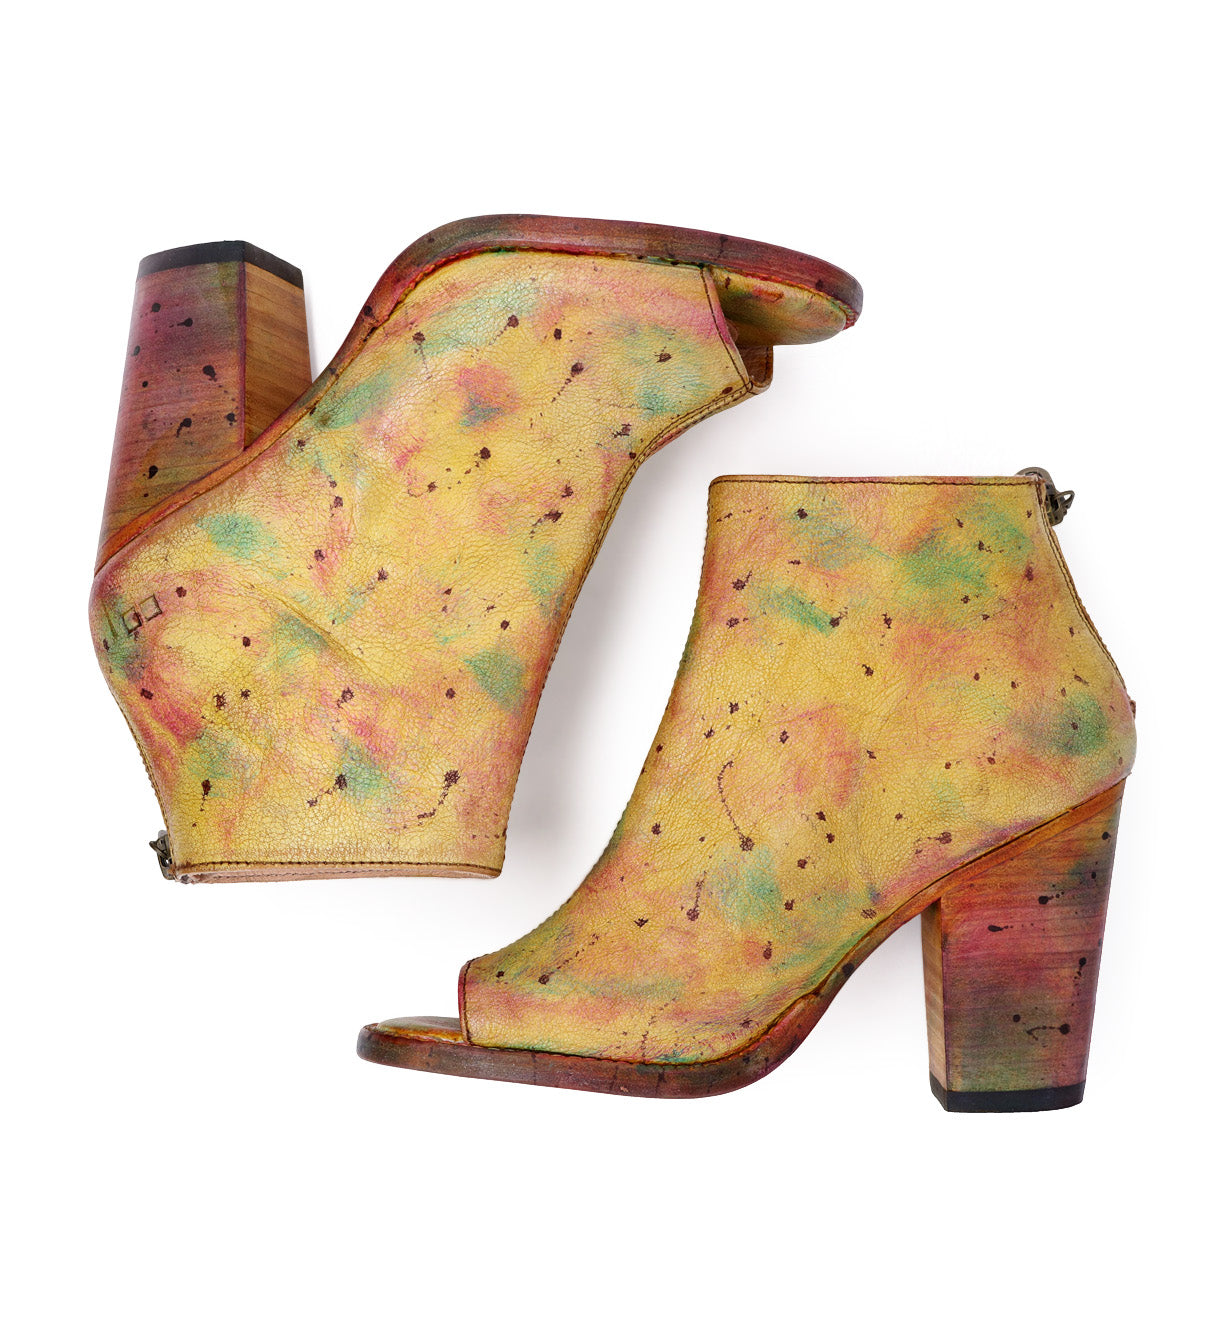 A pair of Bed Stu Onset women's ankle boots with colorful paint on them.